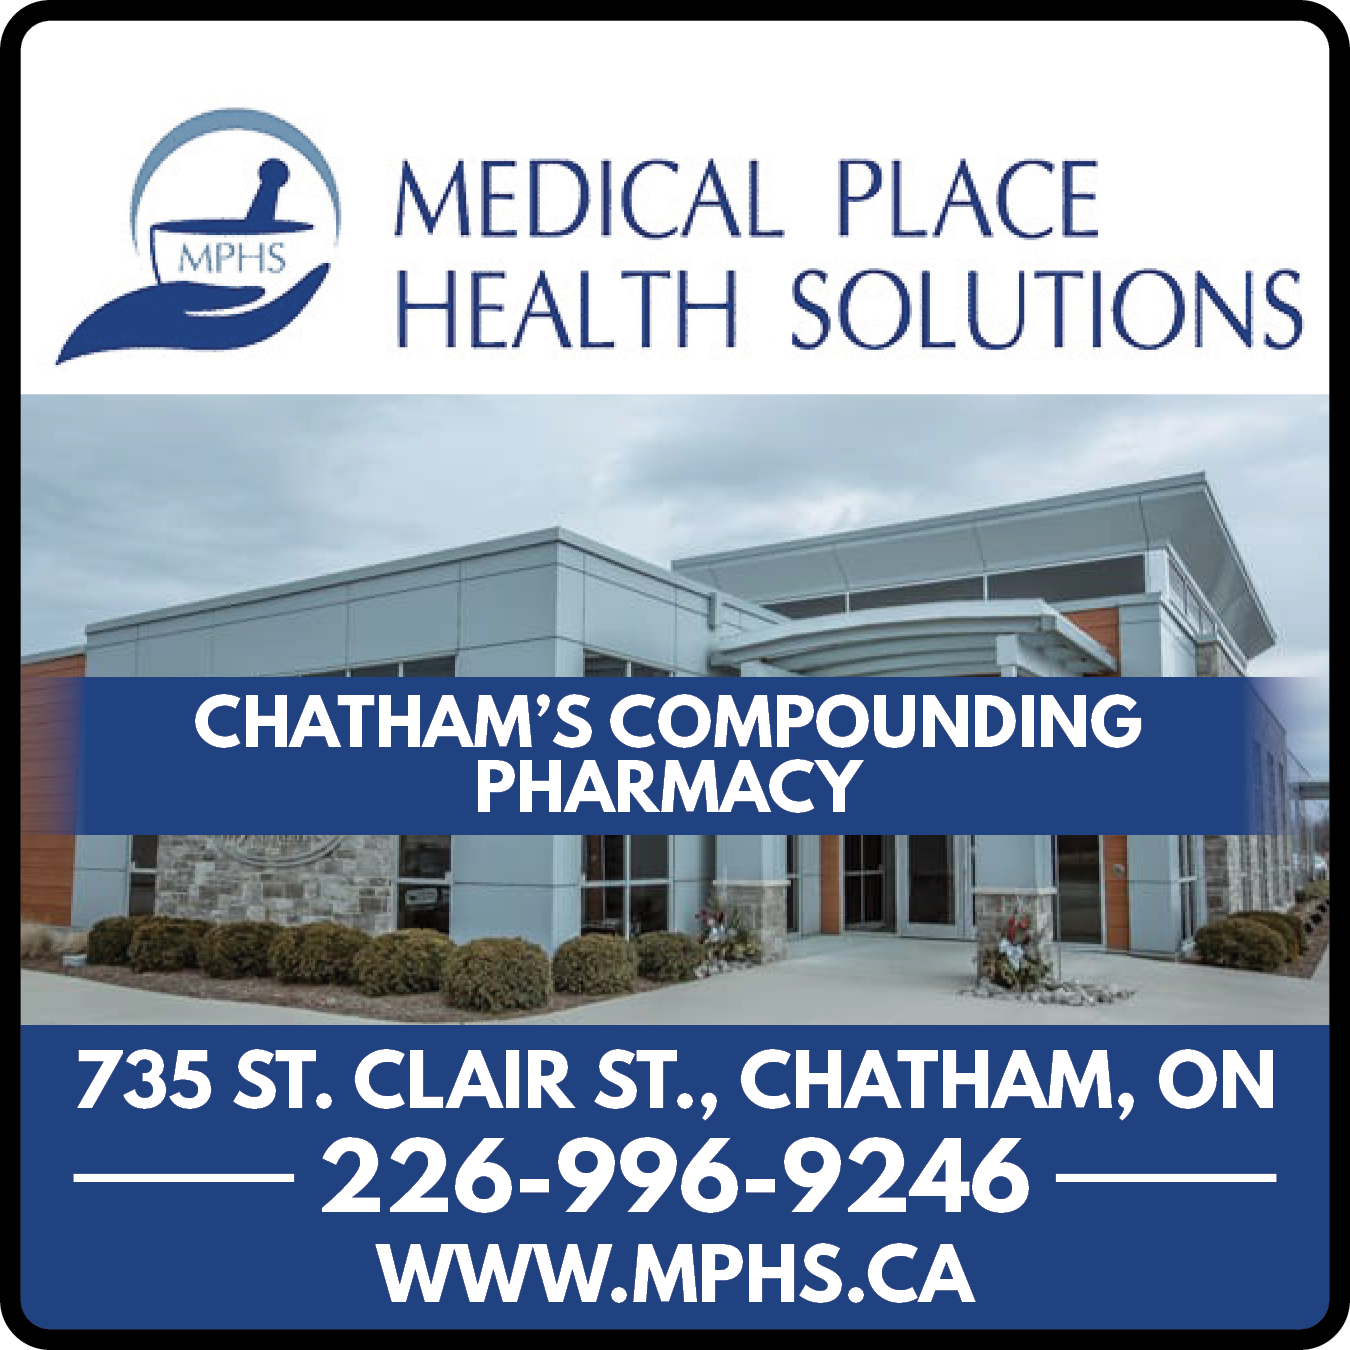 Medical Place Health Solutions